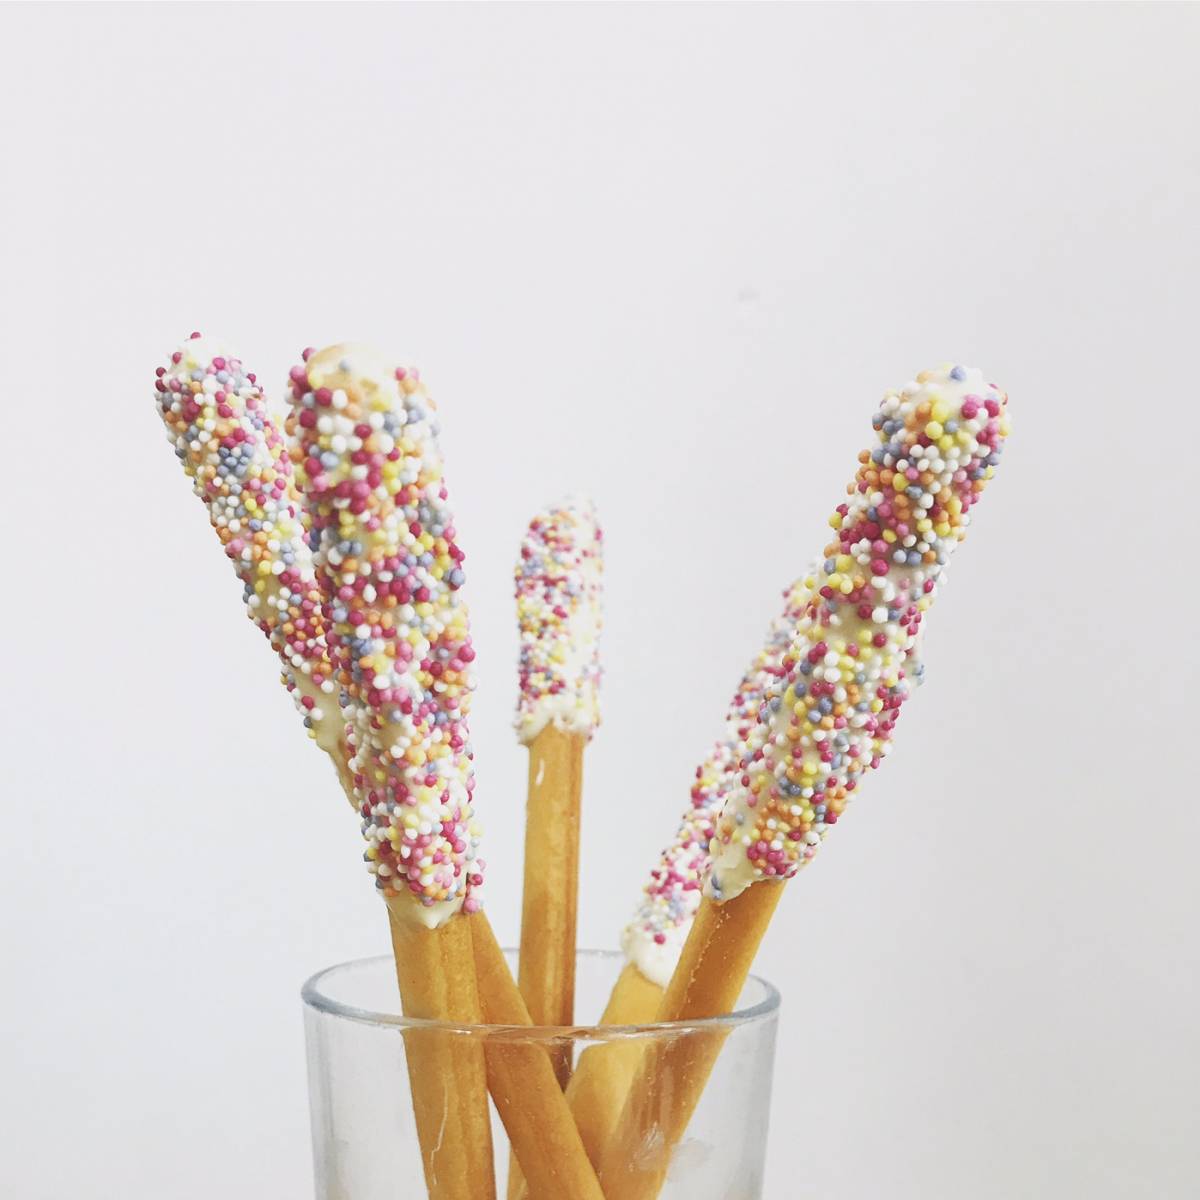 Bonfire night party food – Chocolate Sparklers